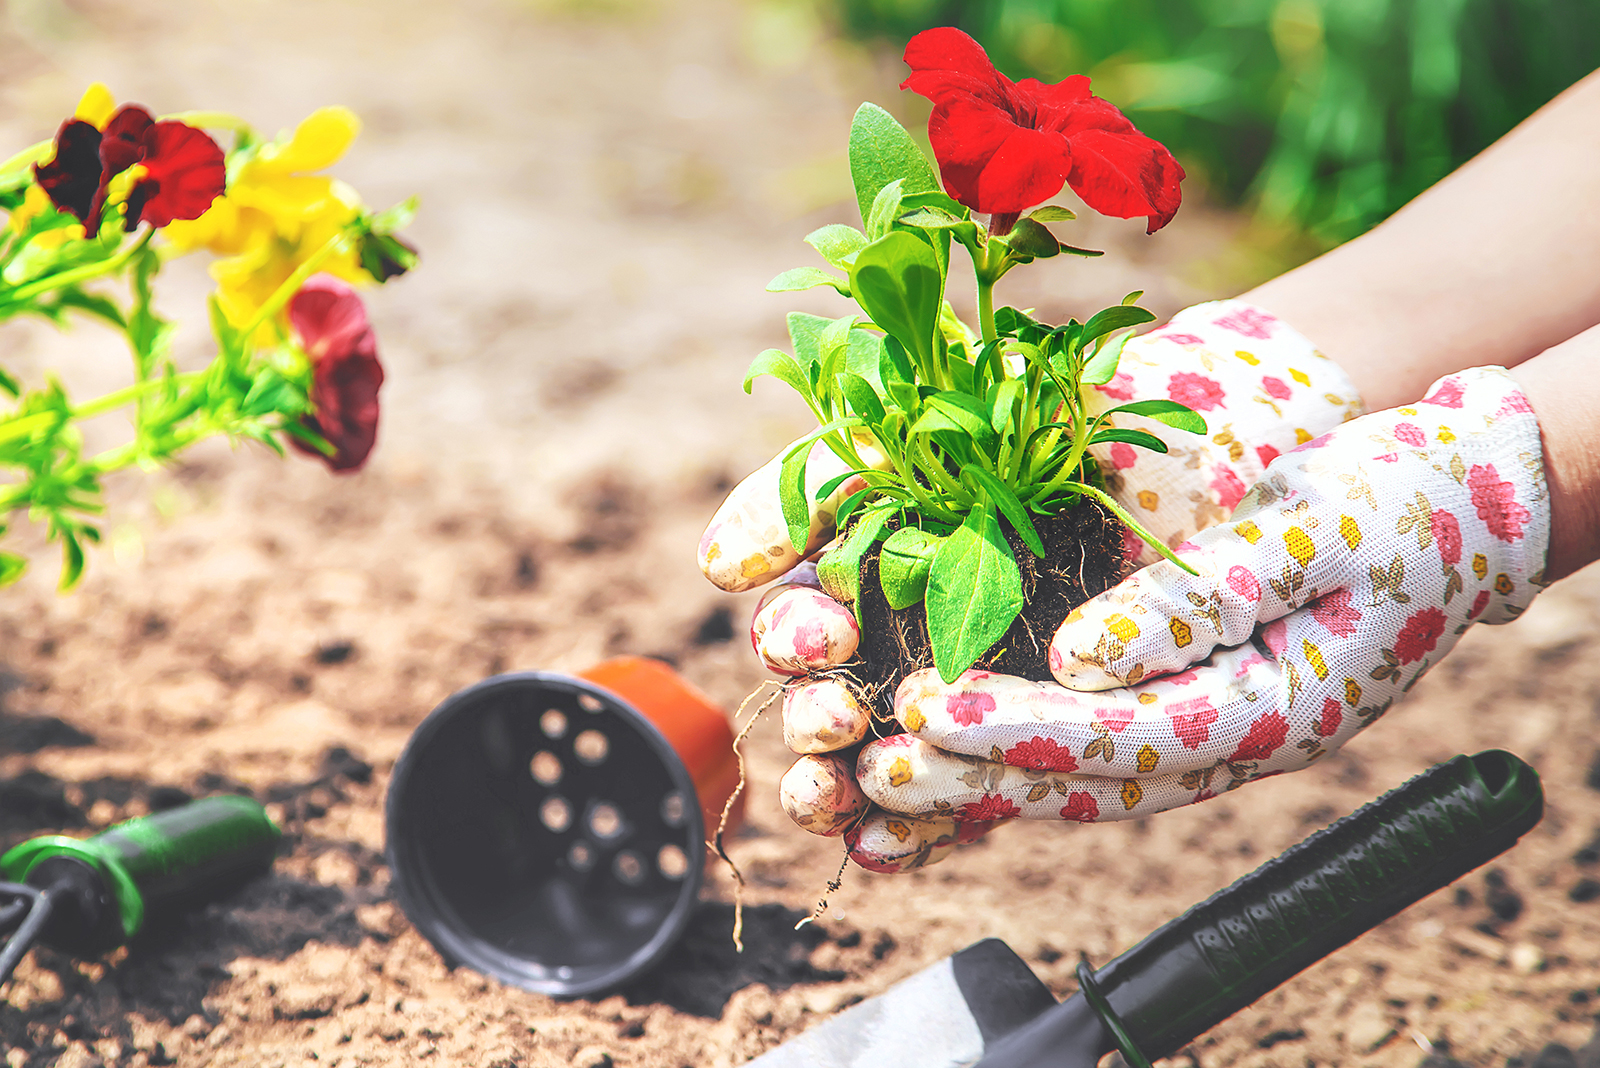 Aging Well: Gardening cultivates benefits for your health | FFXnow